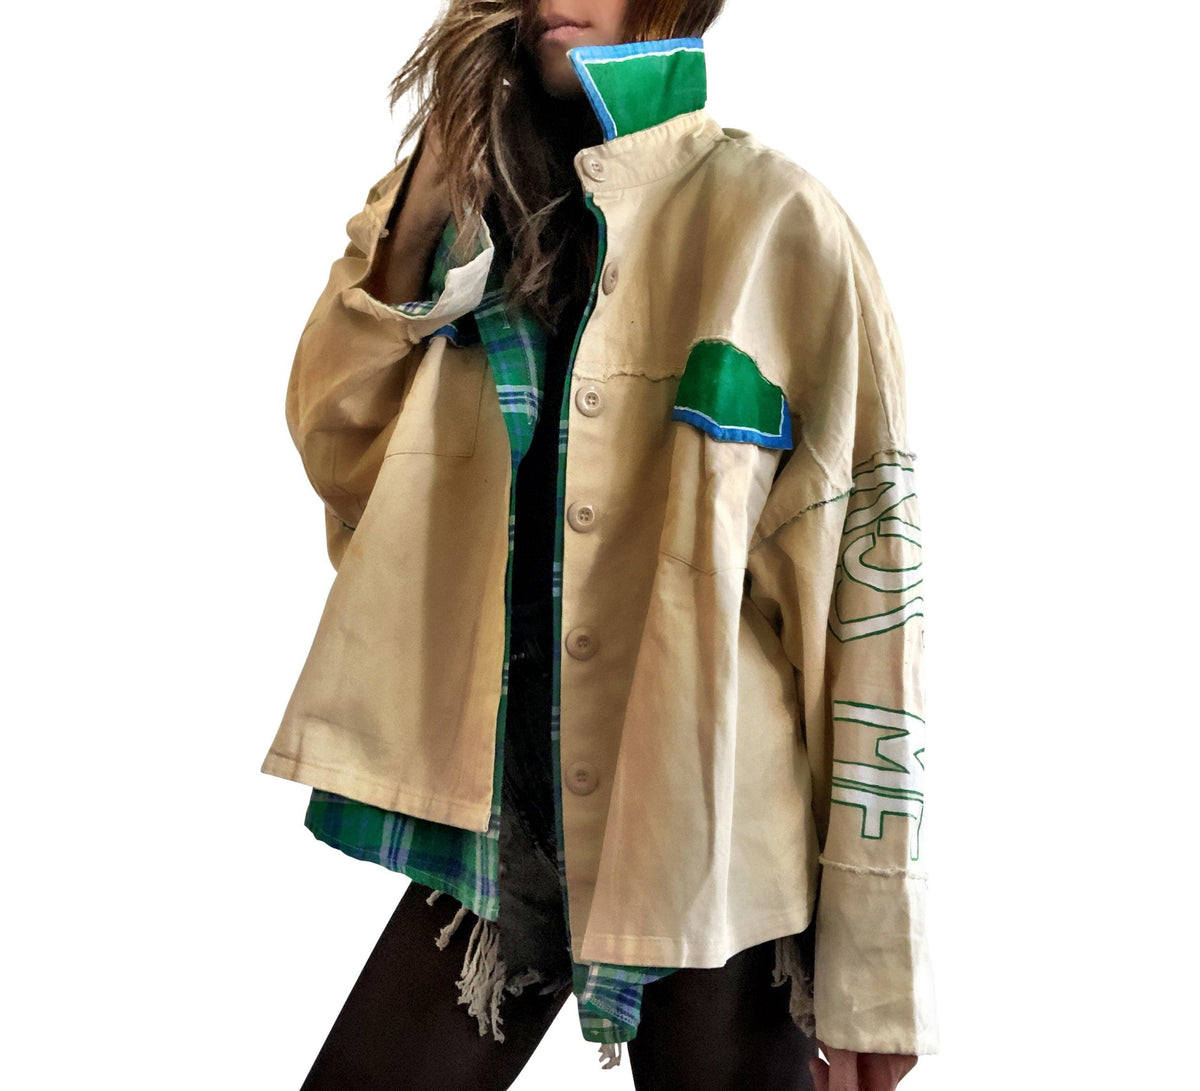 Khaki colored jacket, with green flannel print inside. Large green clover painted on back, with KISS ME down the arm in green and white. Signed @wrenandglory.